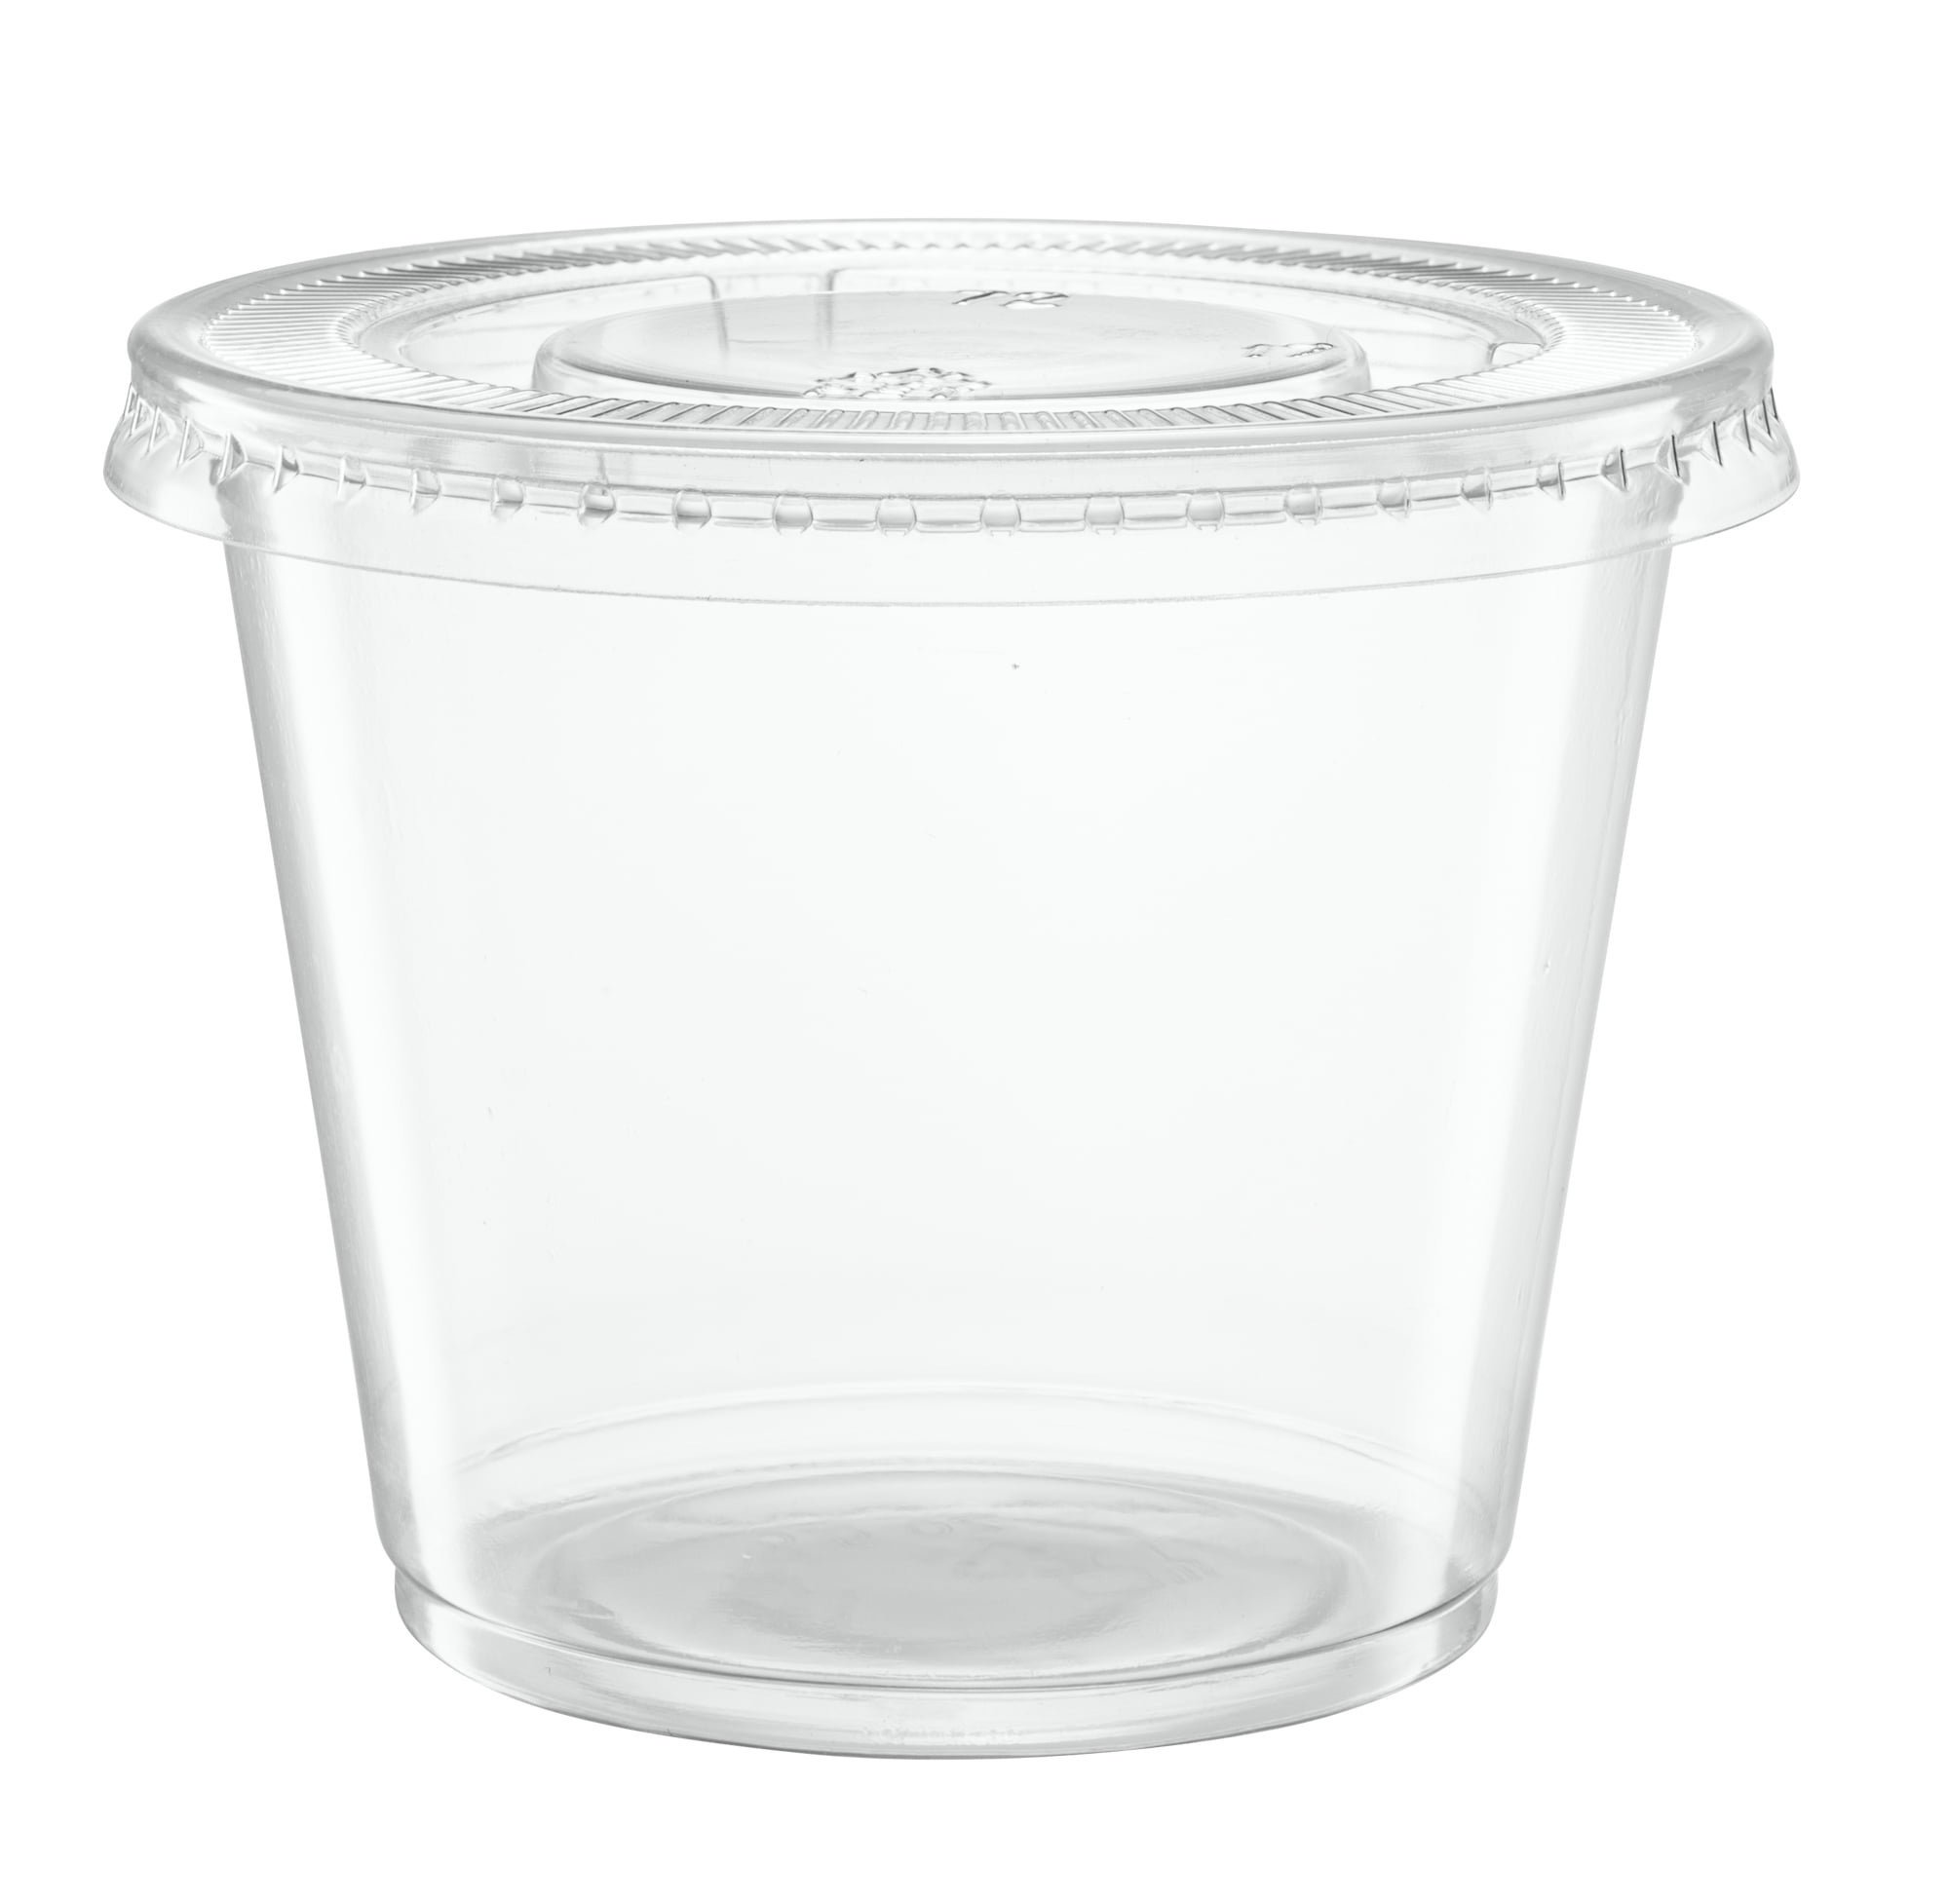 Turbo Bee 100 Sets 1oz Portion Cups with Lids, Small Plastic Cups